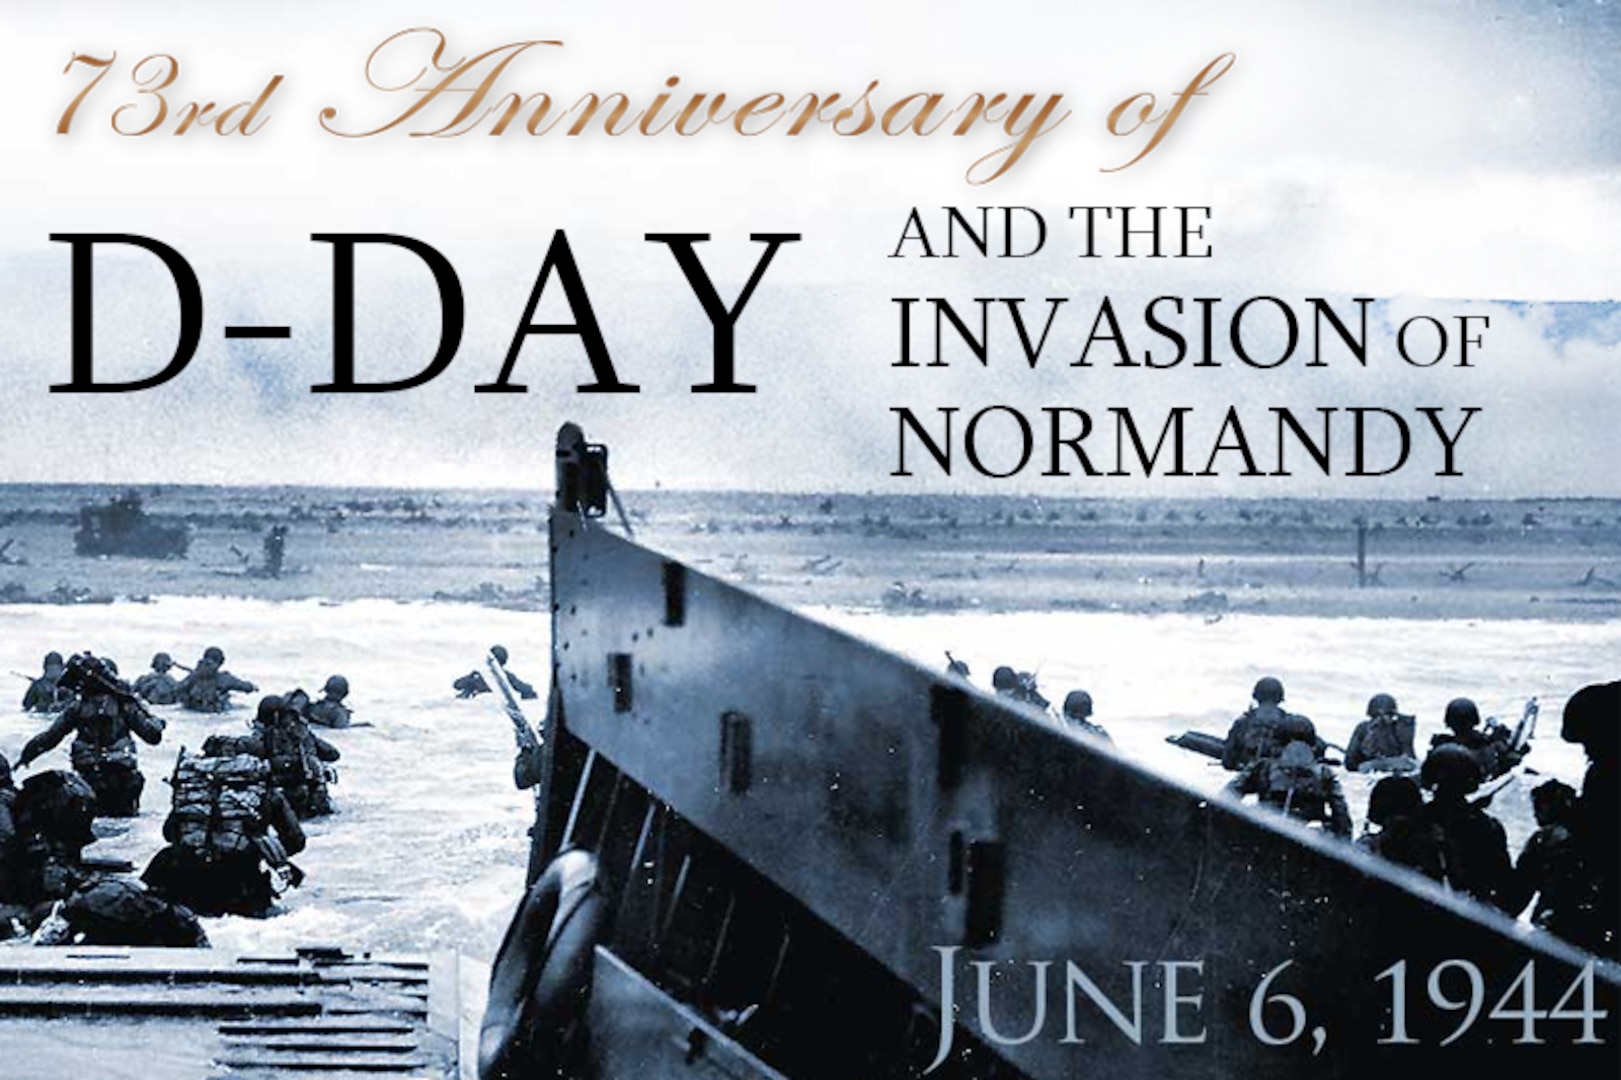 On June 6, 1944, nearly 160,000 Allied troops landed along a heavily fortified, 50-mile stretch of French coastline in the historic operation known as D-Day. More than 9,000 Allied soldiers were killed or wounded on the beaches of Normandy, but by day’s end, the Allies had gained a foothold to begin liberating Europe.